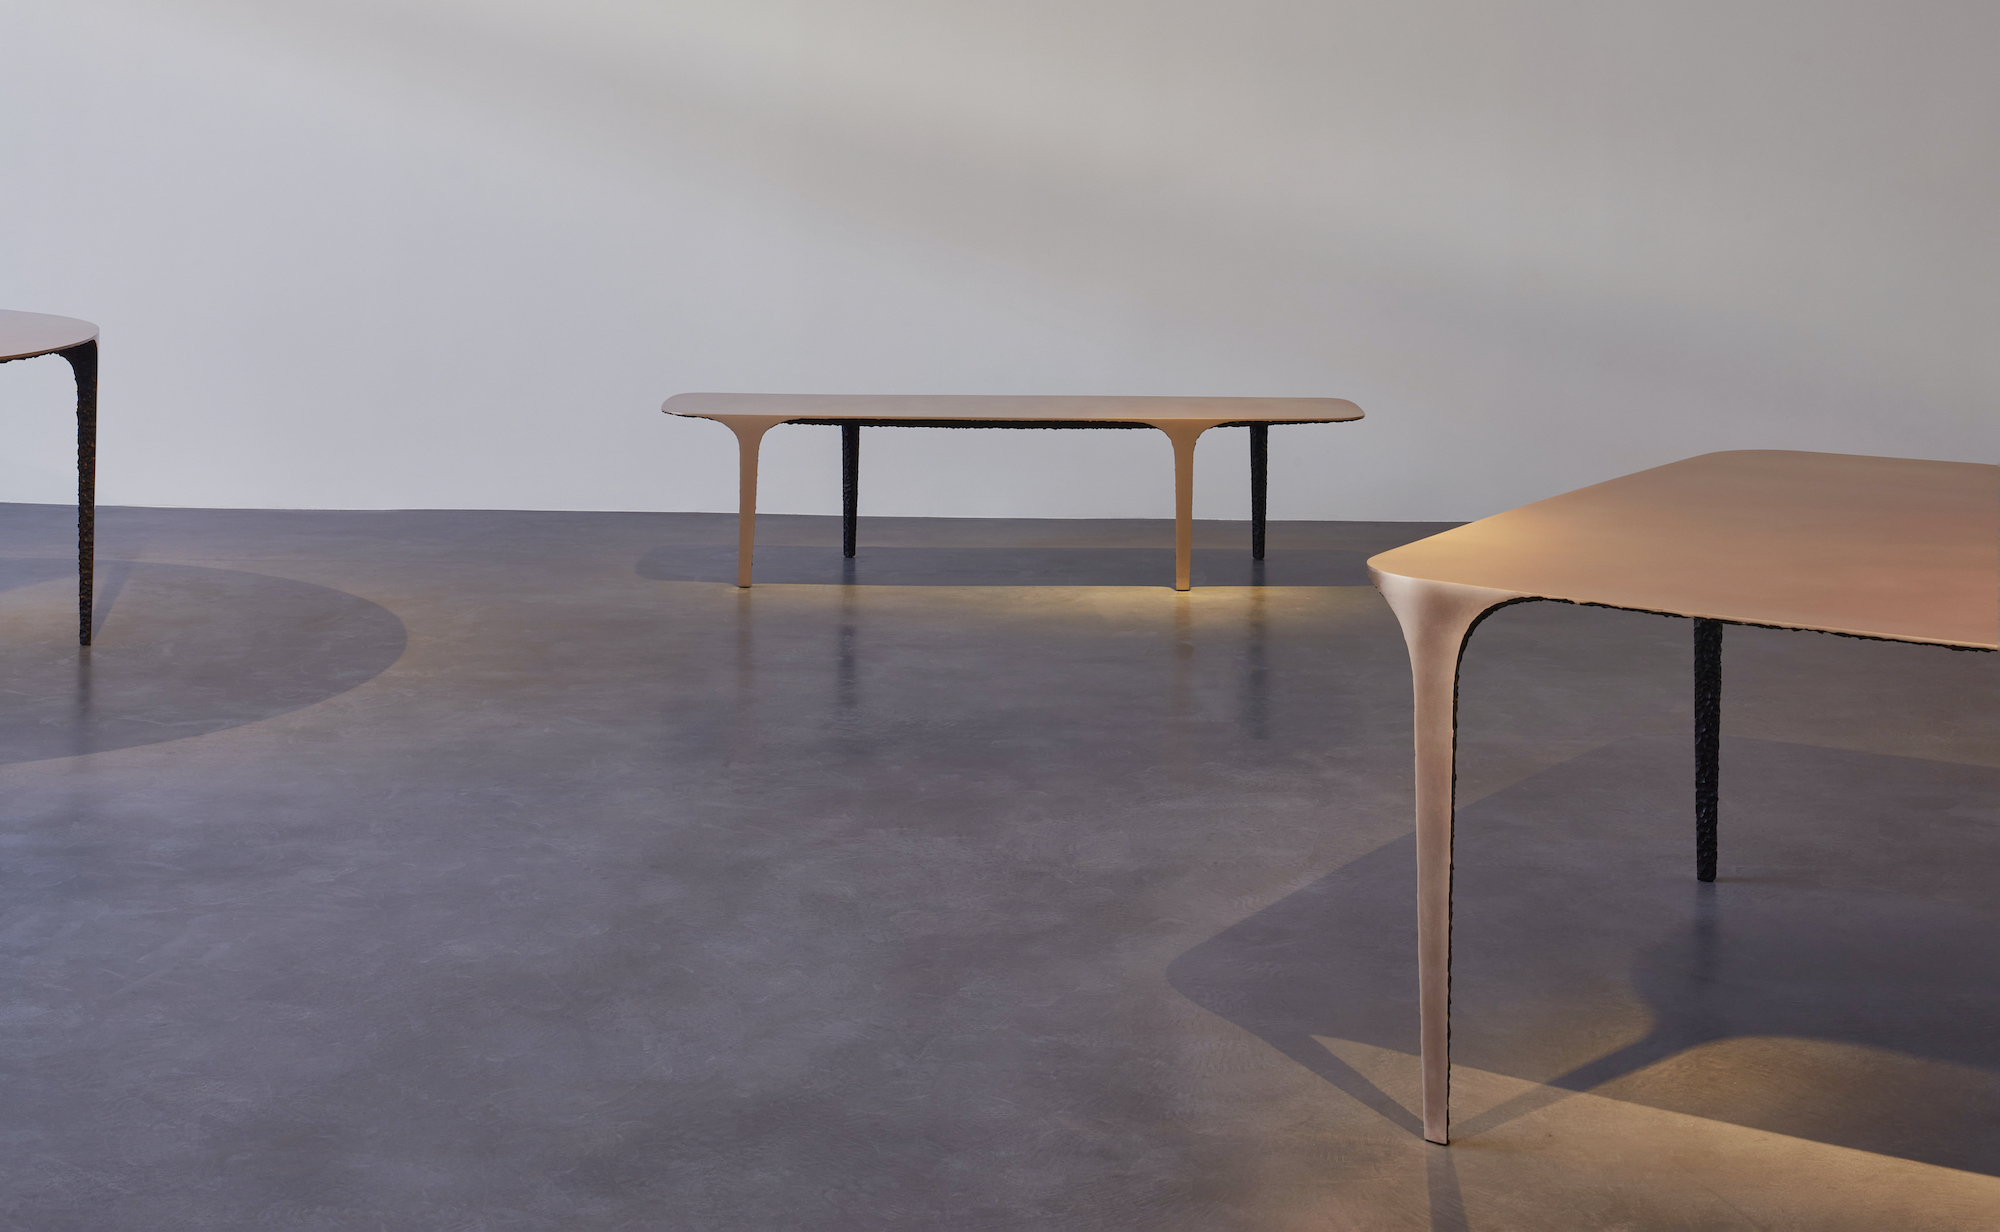 Contemporary table by David Adjaye from Carpenters Workshop Gallery  - Effect Magazine